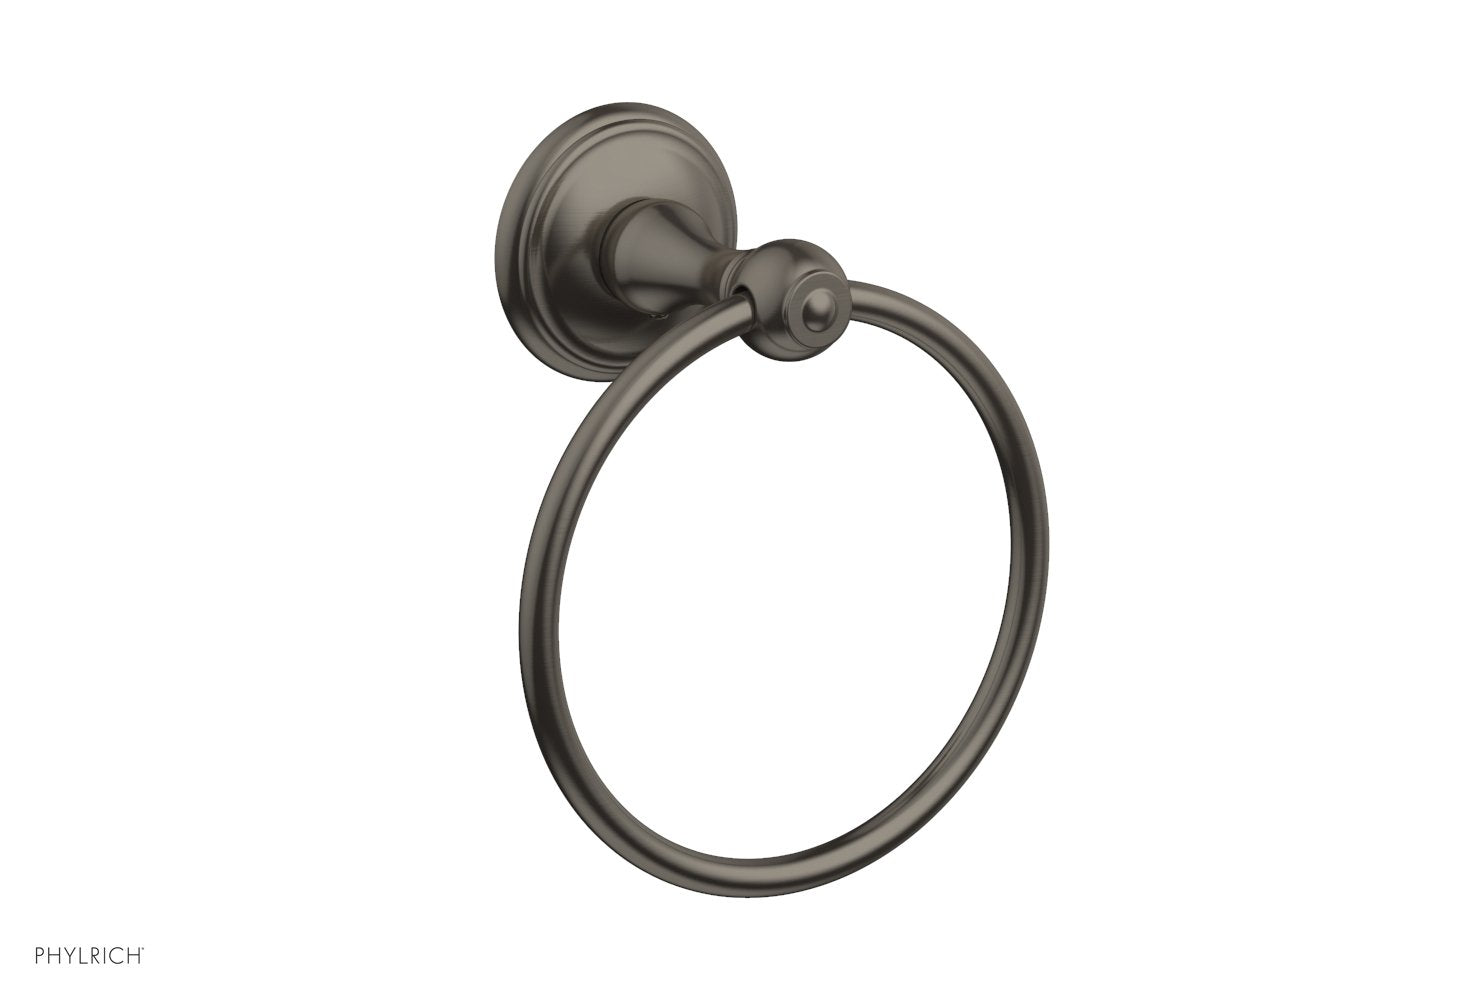 Phylrich 3RING Towel Ring